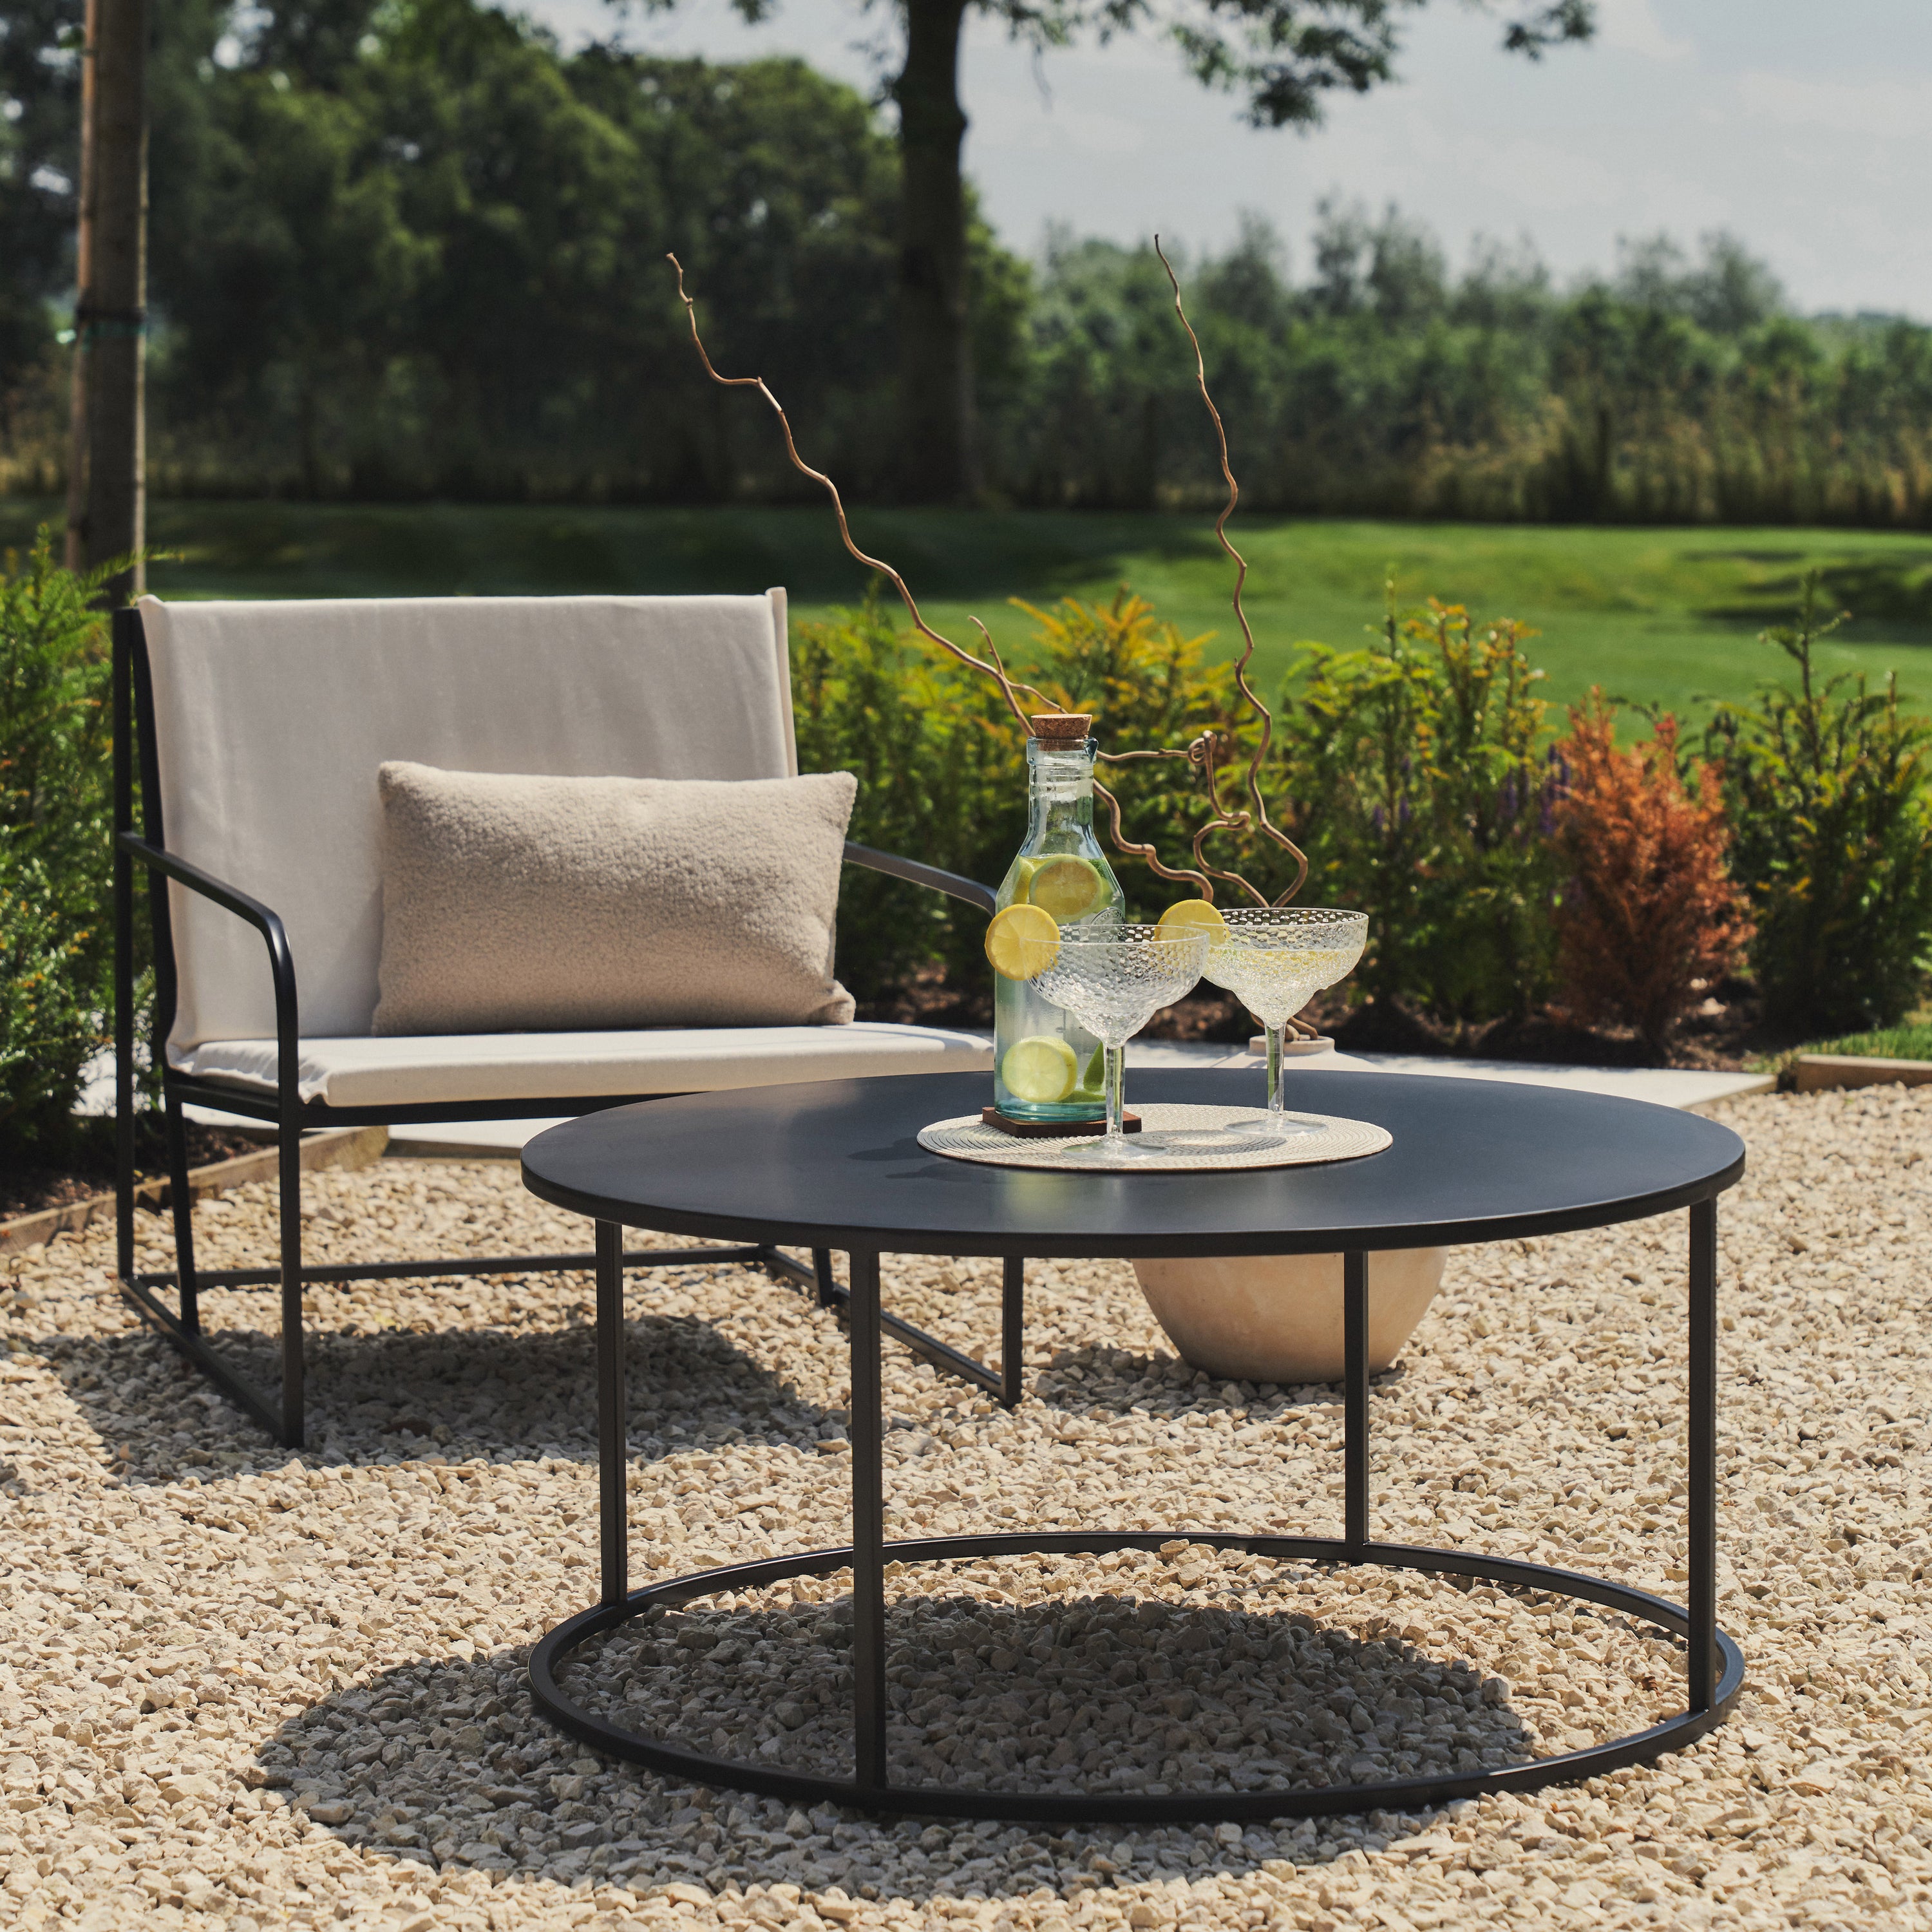 Black Modern Rounded Garden Coffee Table bsdie sand chair